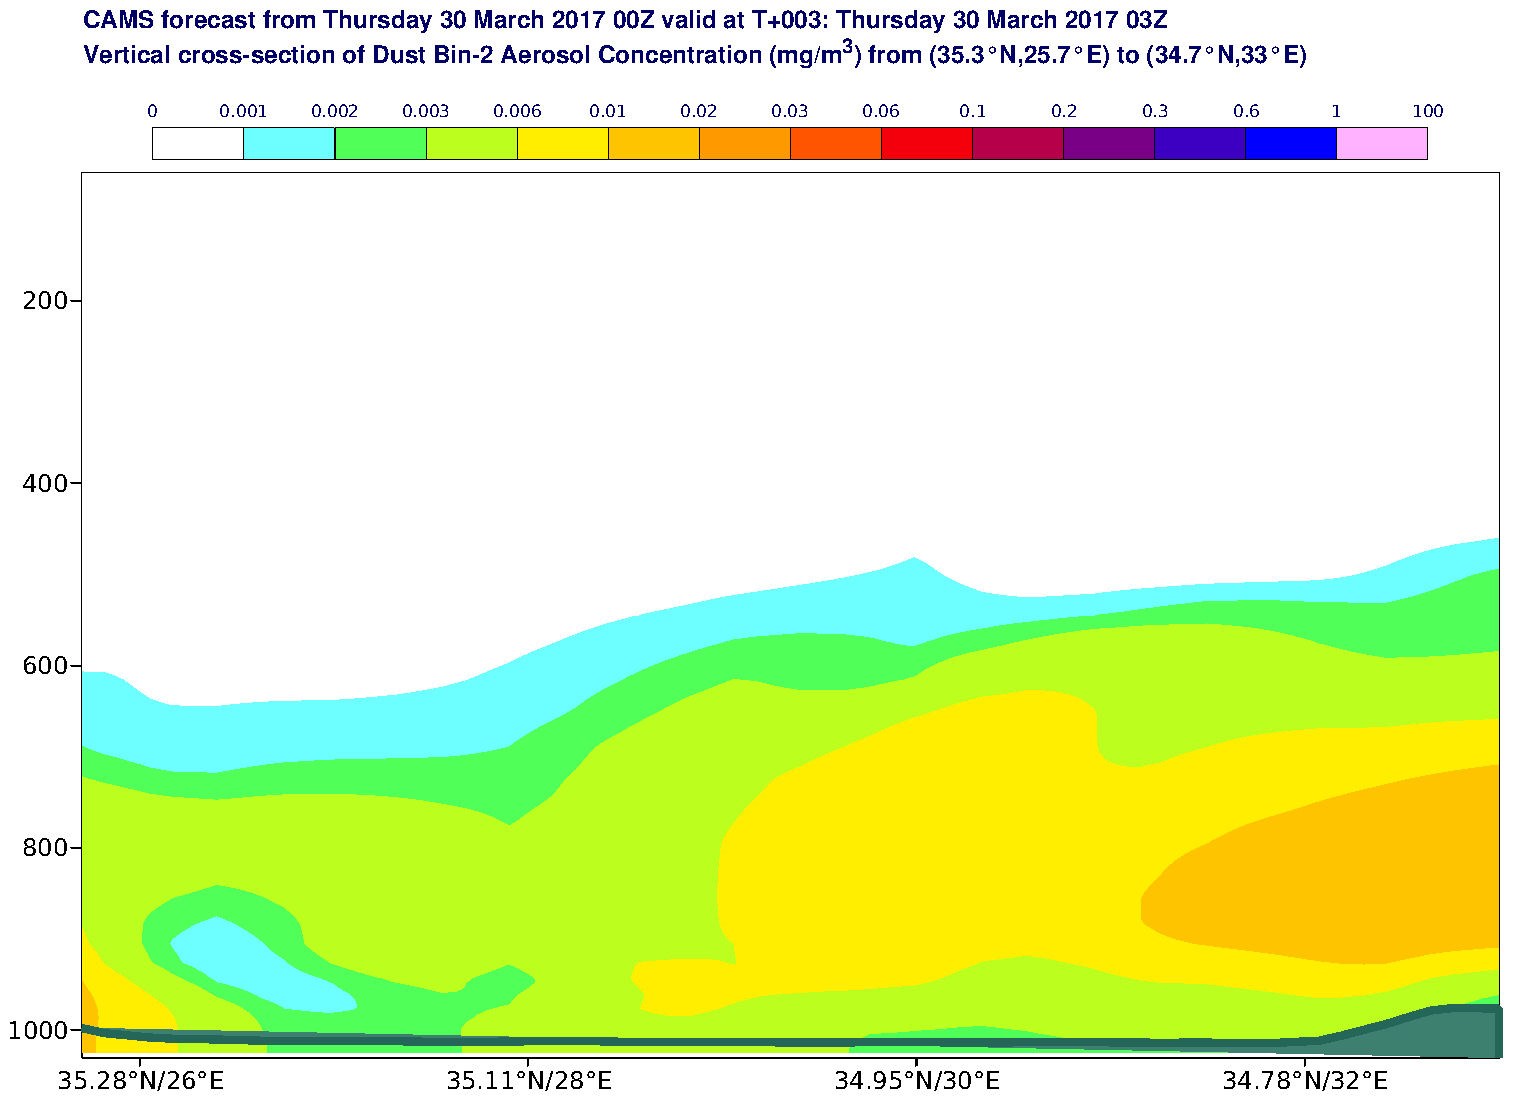 Vertical cross-section of Dust Bin-2 Aerosol Concentration (mg/m3) valid at T3 - 2017-03-30 03:00